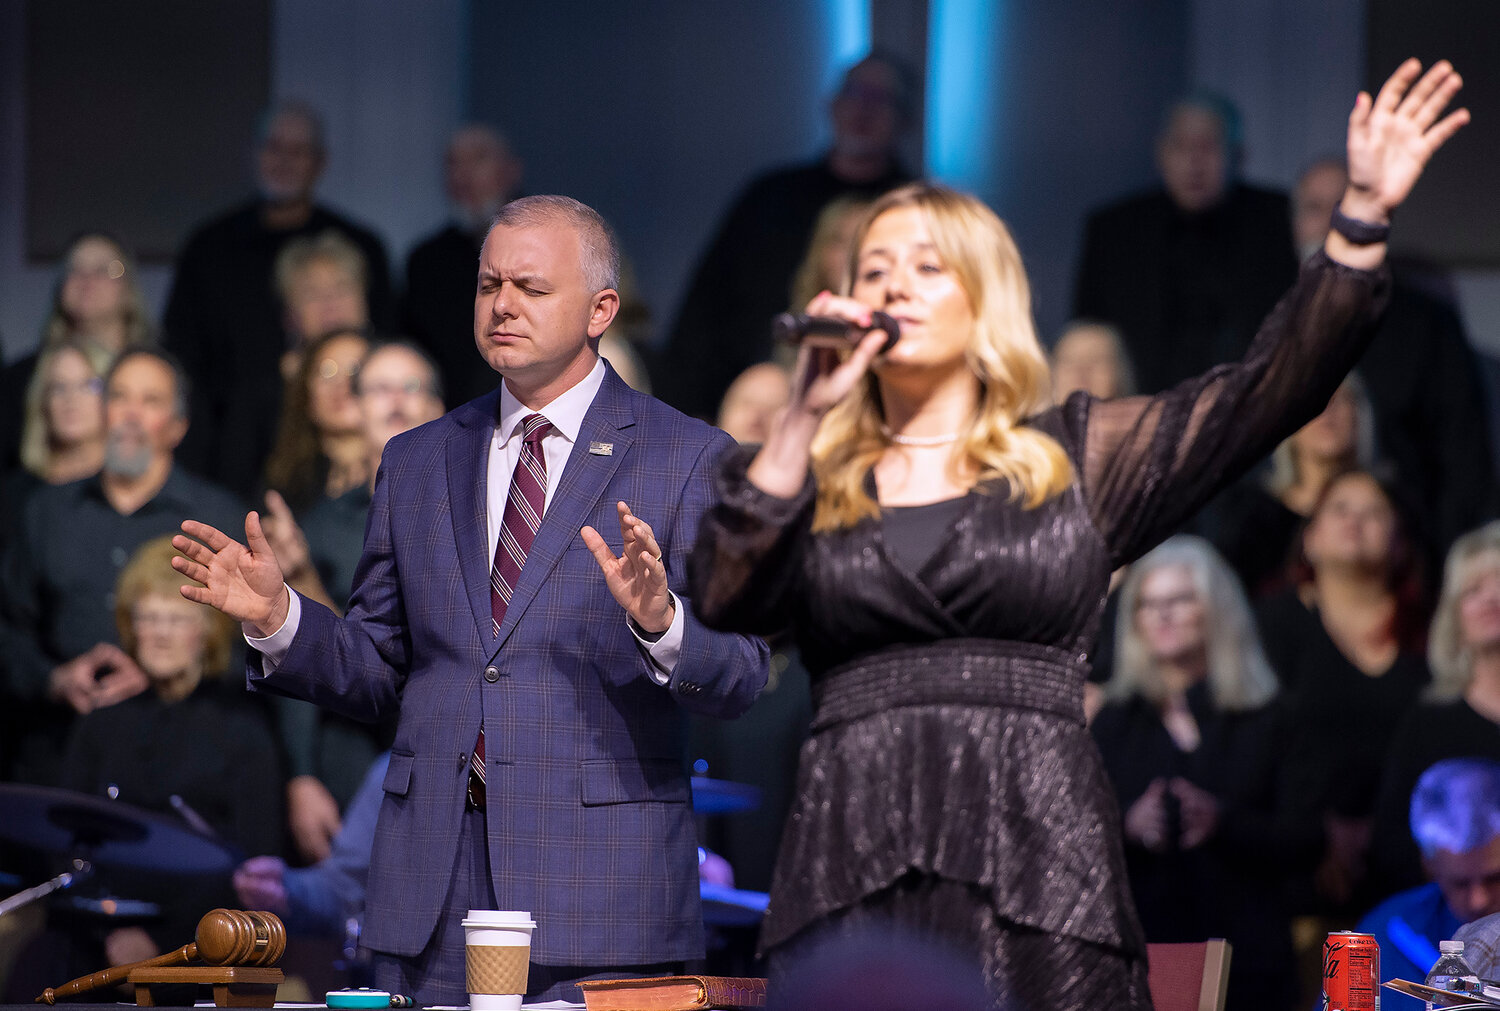 Georgia Baptist Convention President Josh Saefkow, left, and Kayla Smith worship during the third day of the Convention's 201st annual meeting at Church on Main in Snellville, Ga. (Index/Henry Durand)